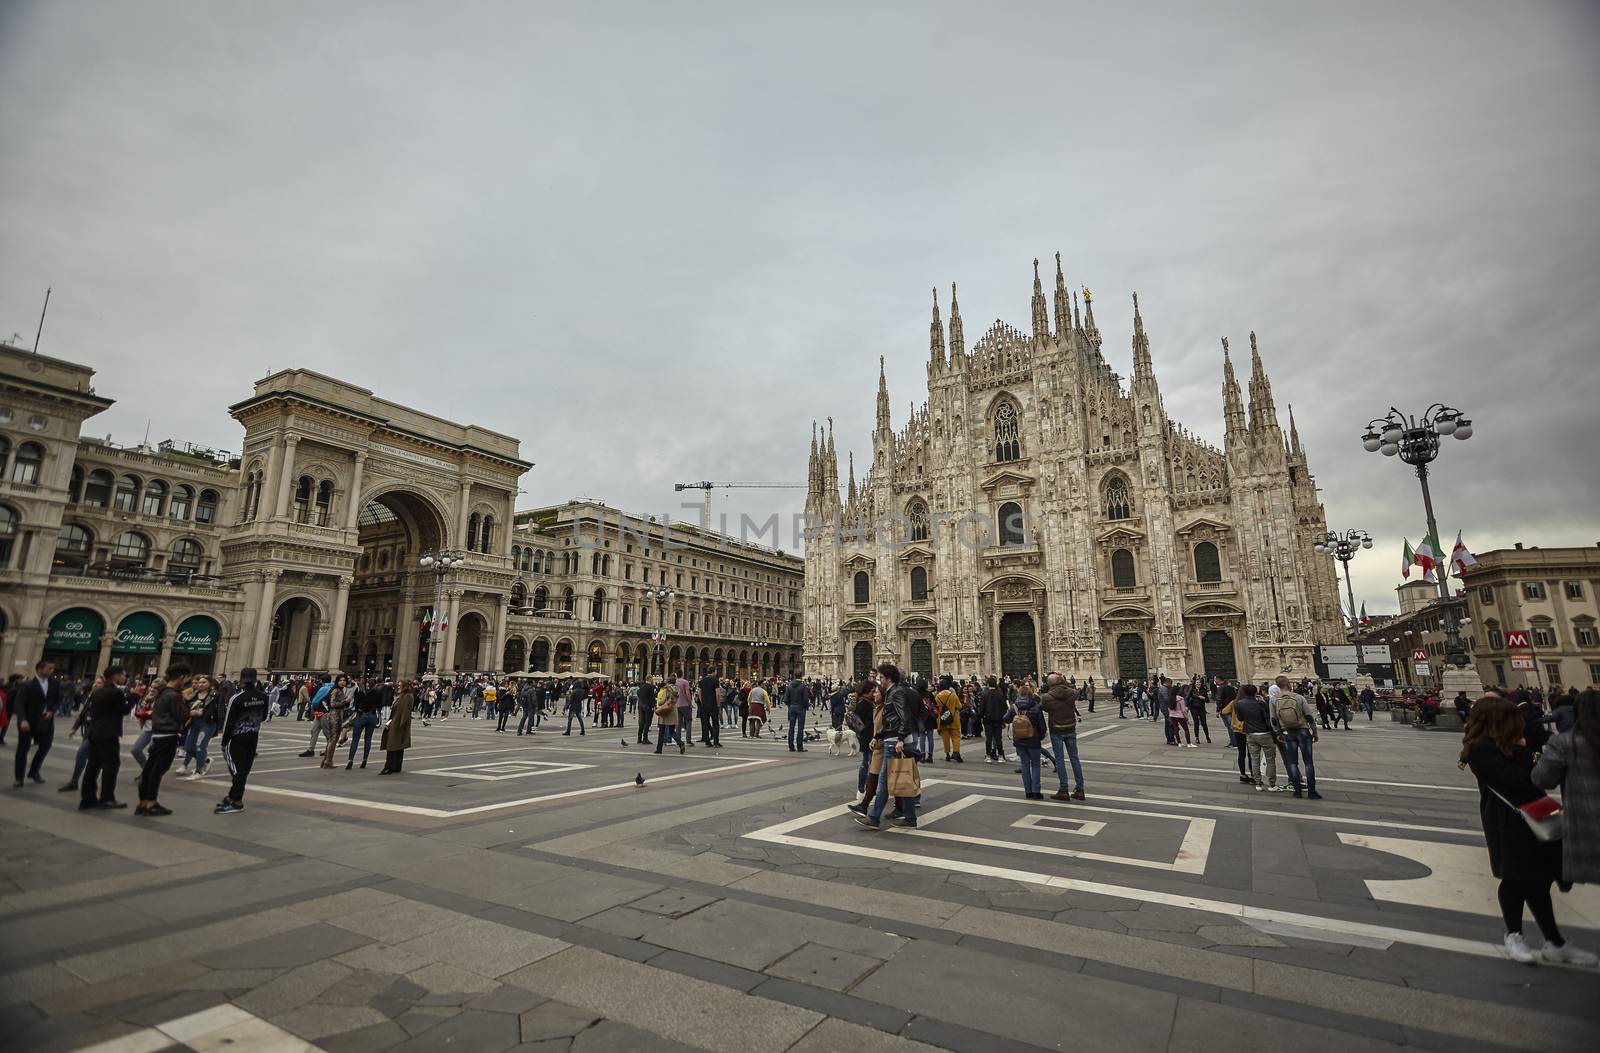 MILAN, ITALY 10 MARCH 2020: Milan Cathedral with tourists and people strolling en masse on the square